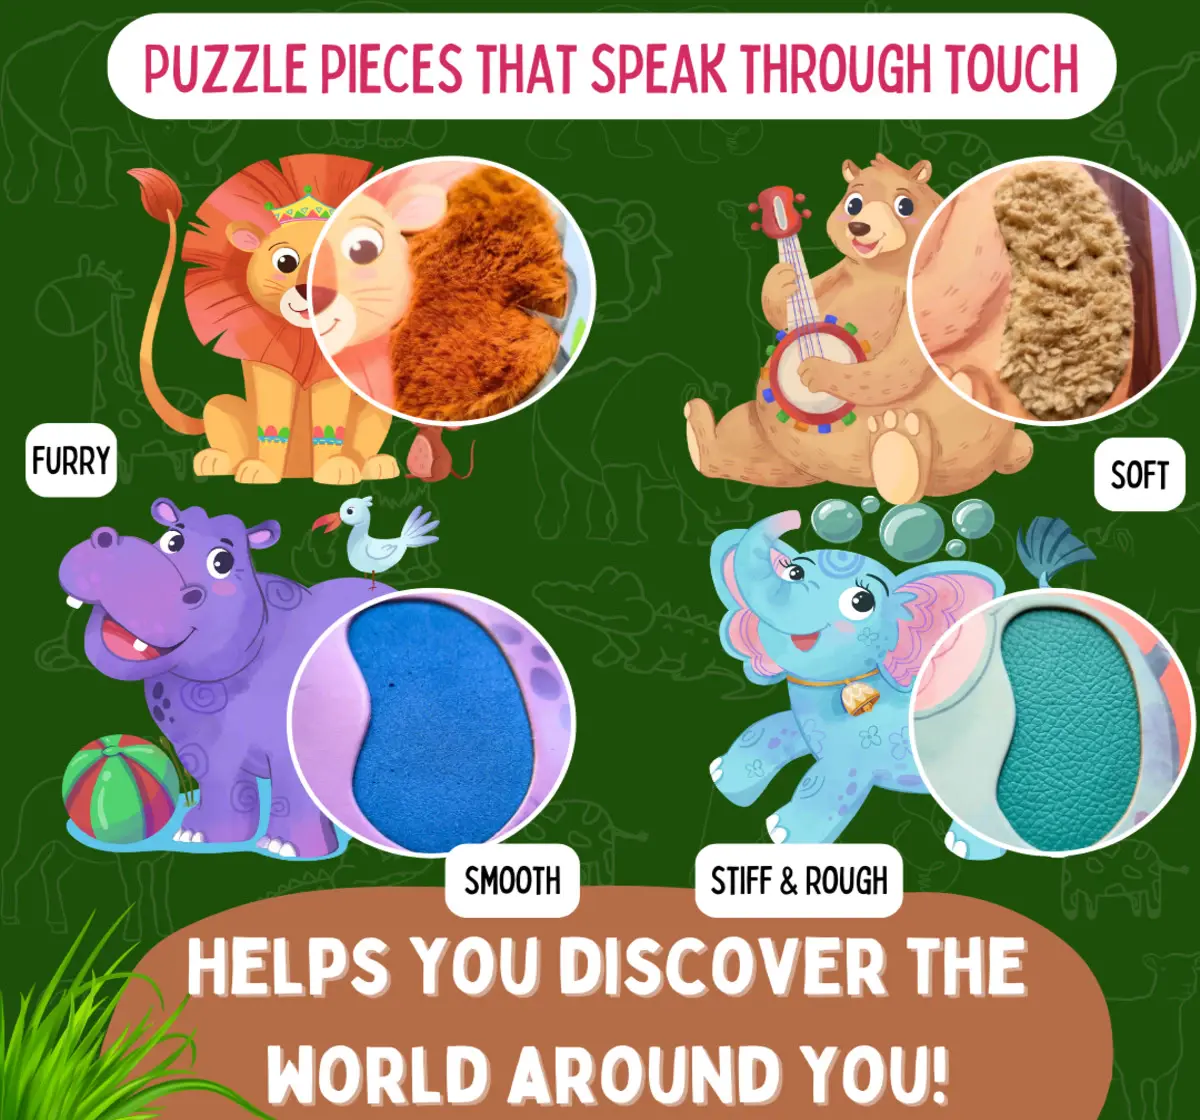 PepPlay My First Touch & Feel Puzzles Wild Animals For Kids of Age 12M+, Multicolour